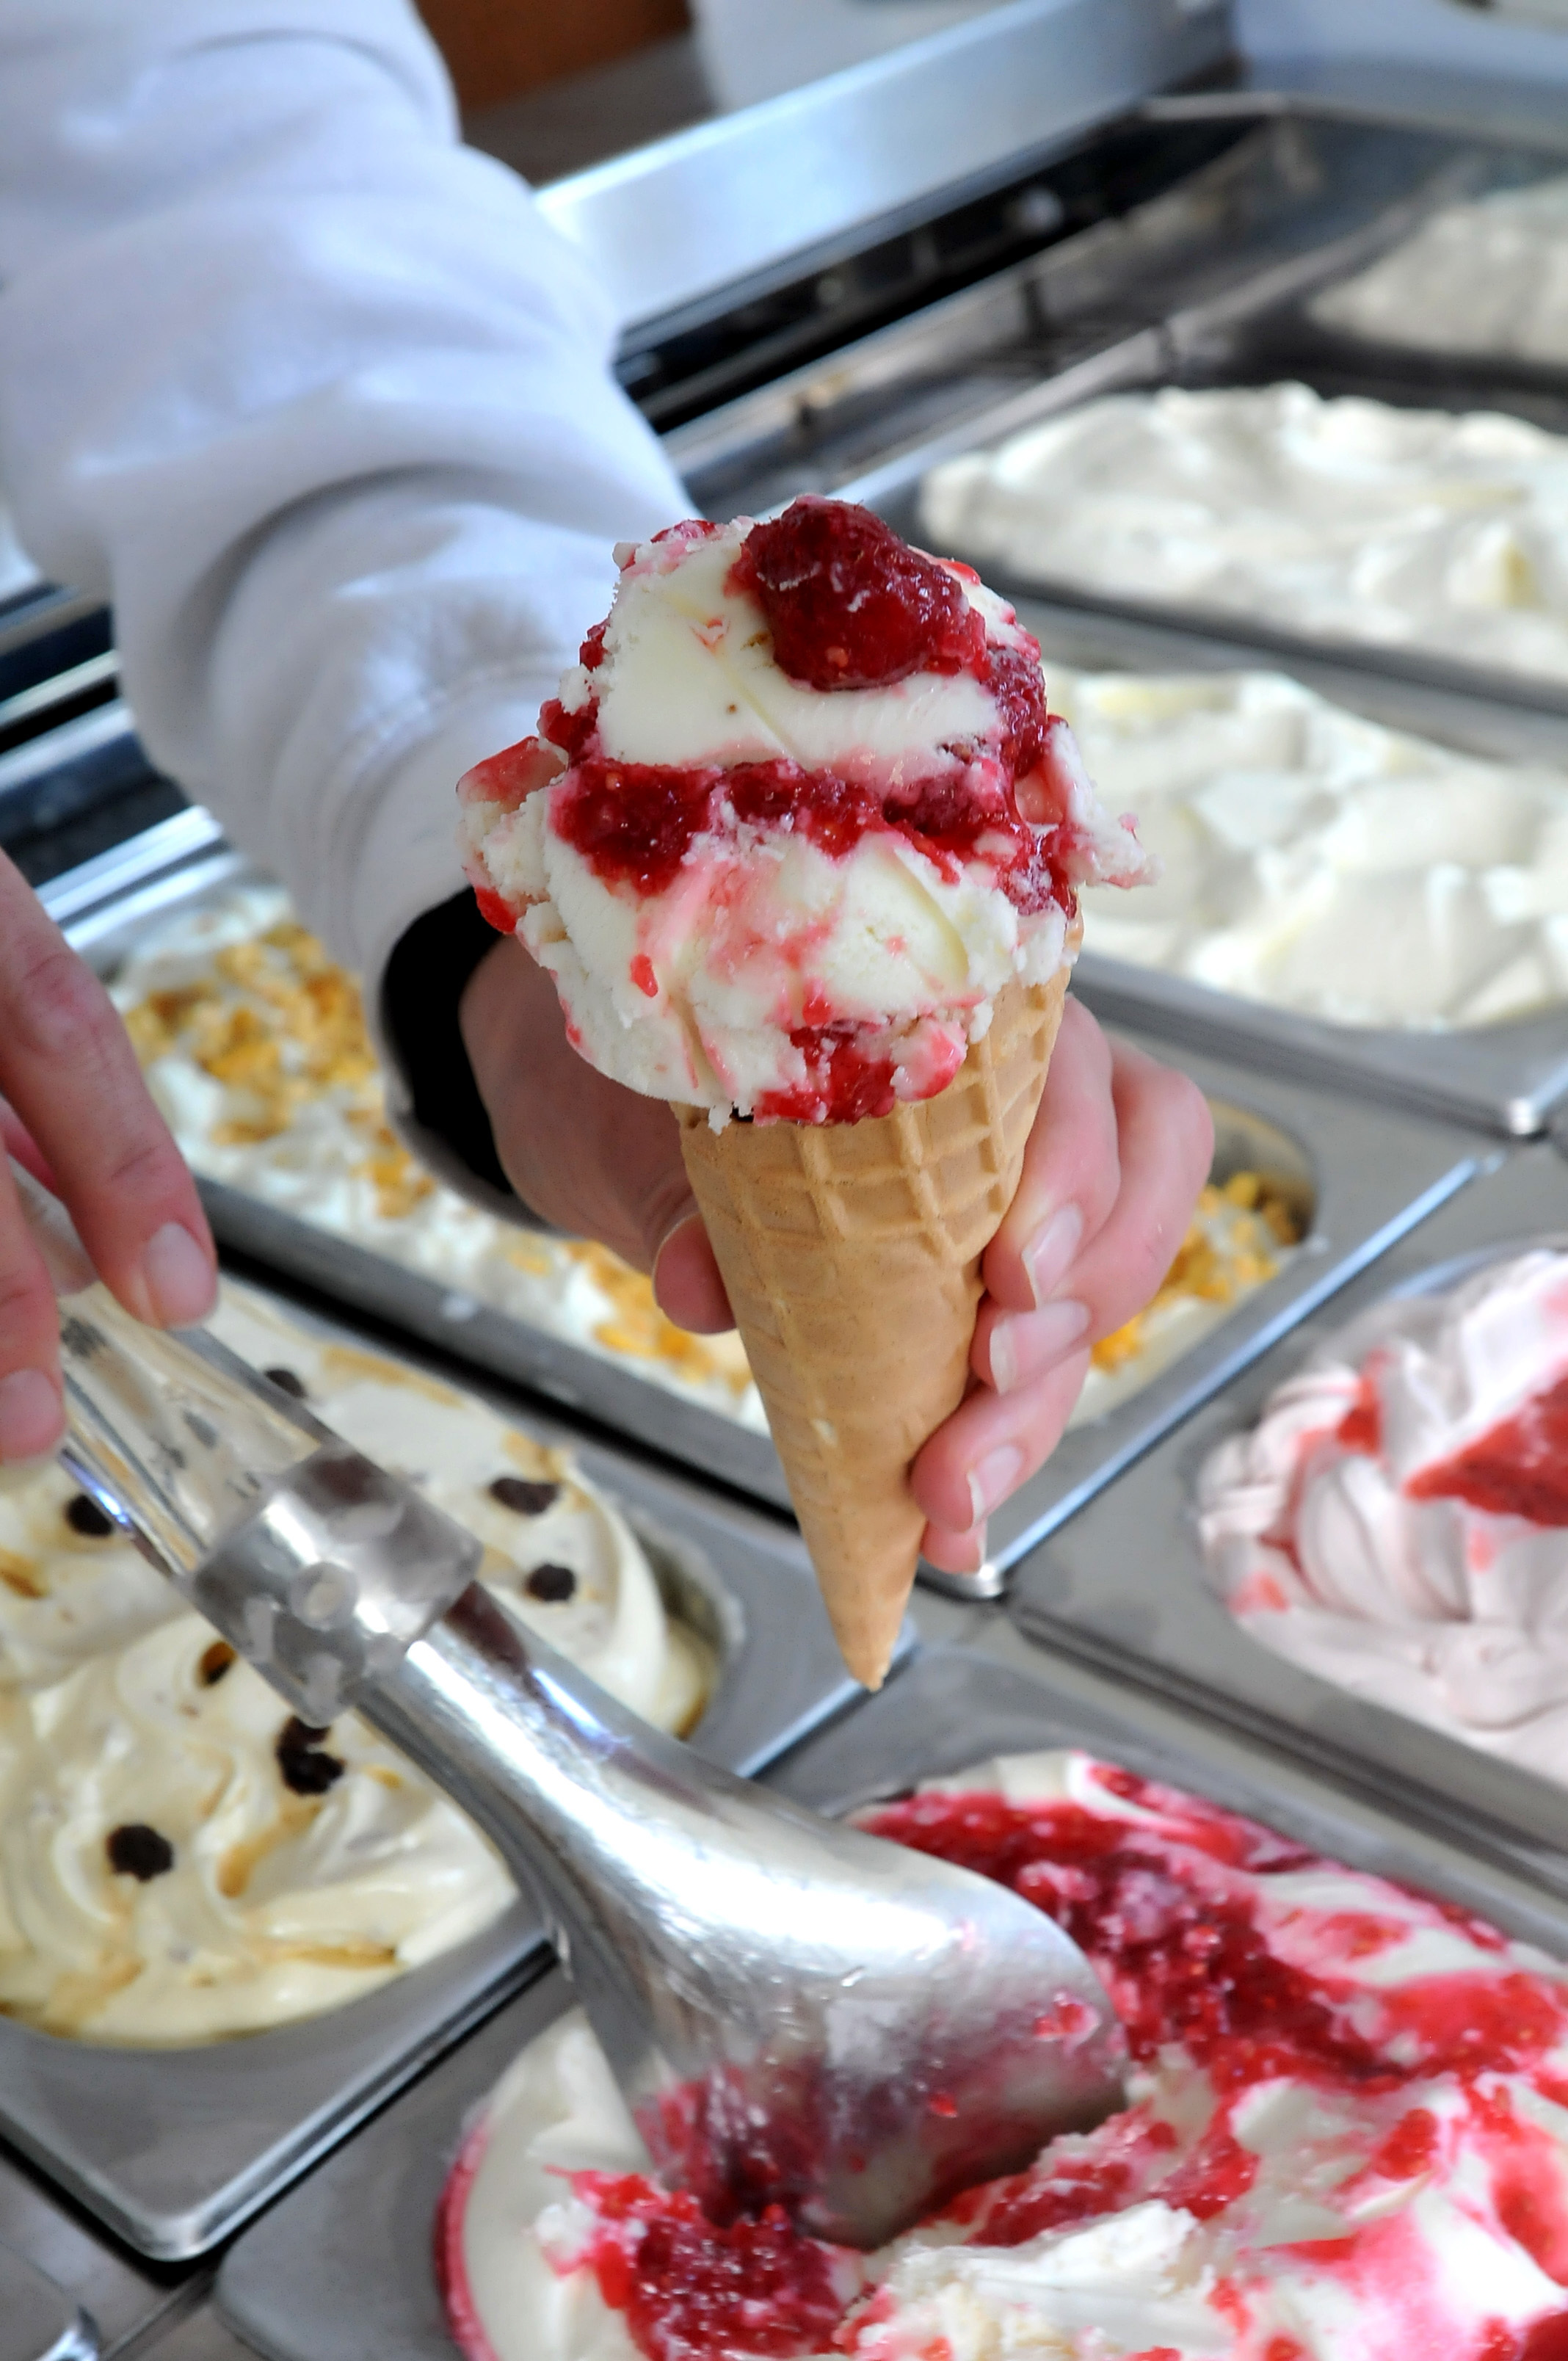 Daresbury Dairy has a whole host of flavours to tempt the tastebuds (Daresbury Dairy)